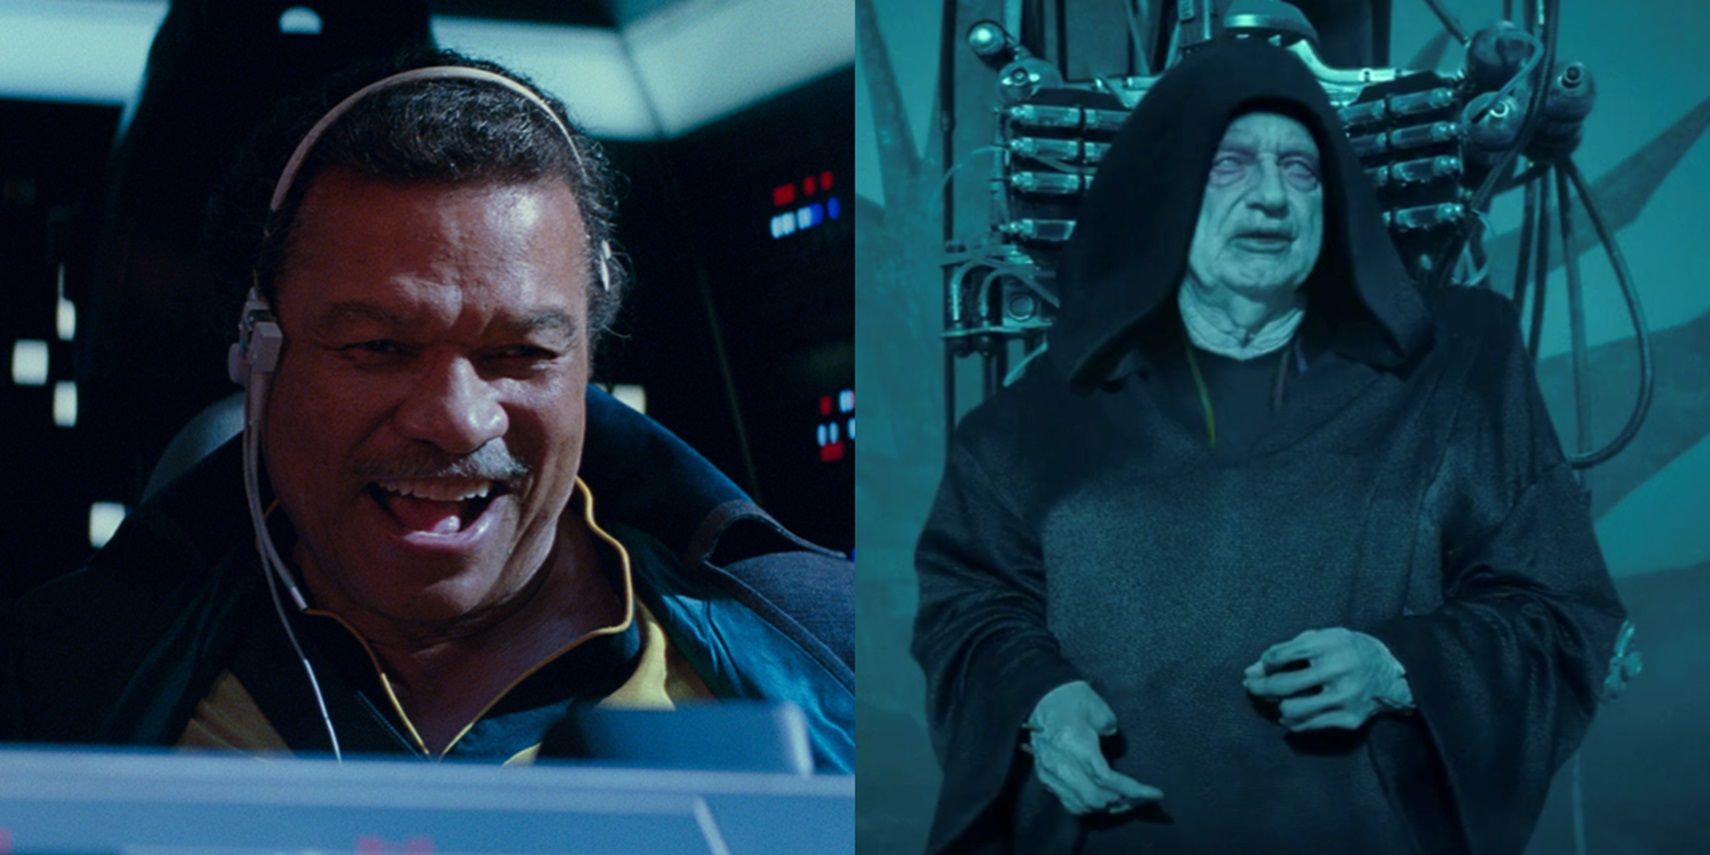 Lando and Palpatine in The Rise of Skywalker